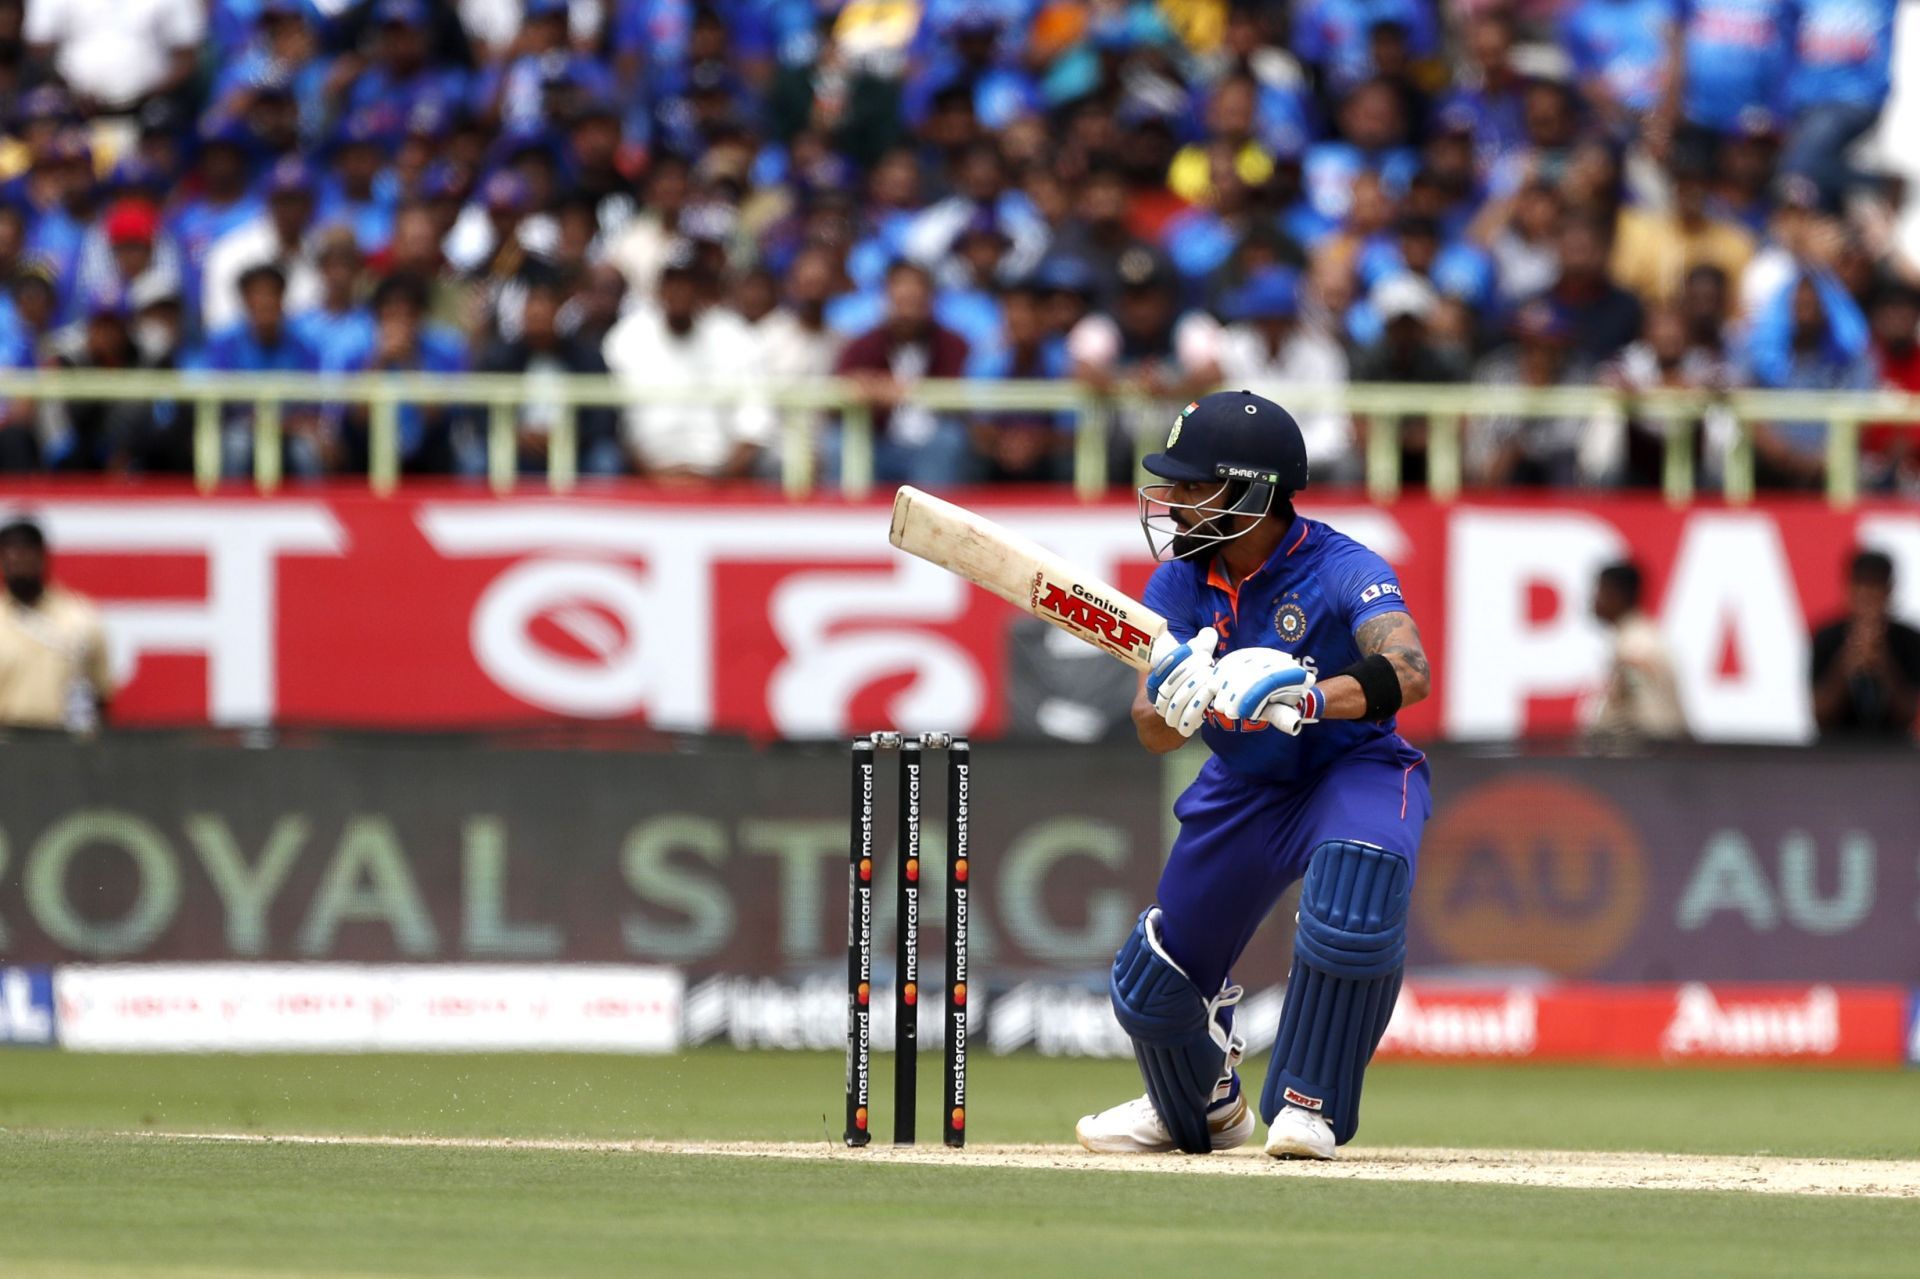 Virat Kohli looked largely untroubled during his stay in the middle.